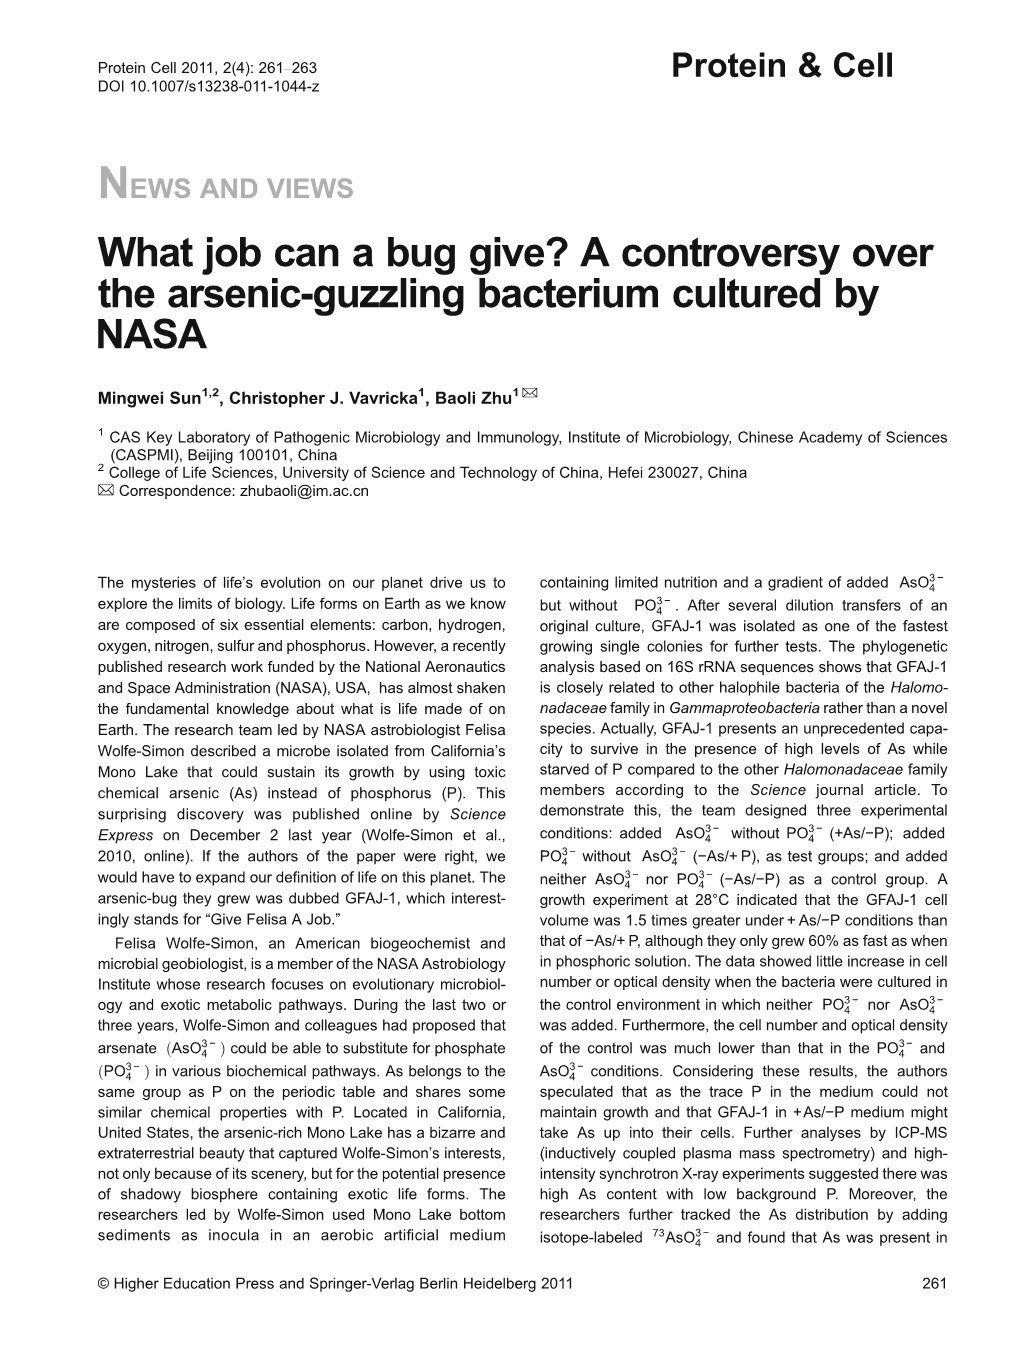 What Job Can a Bug Give? a Controversy Over the Arsenic-Guzzling Bacterium Cultured by NASA